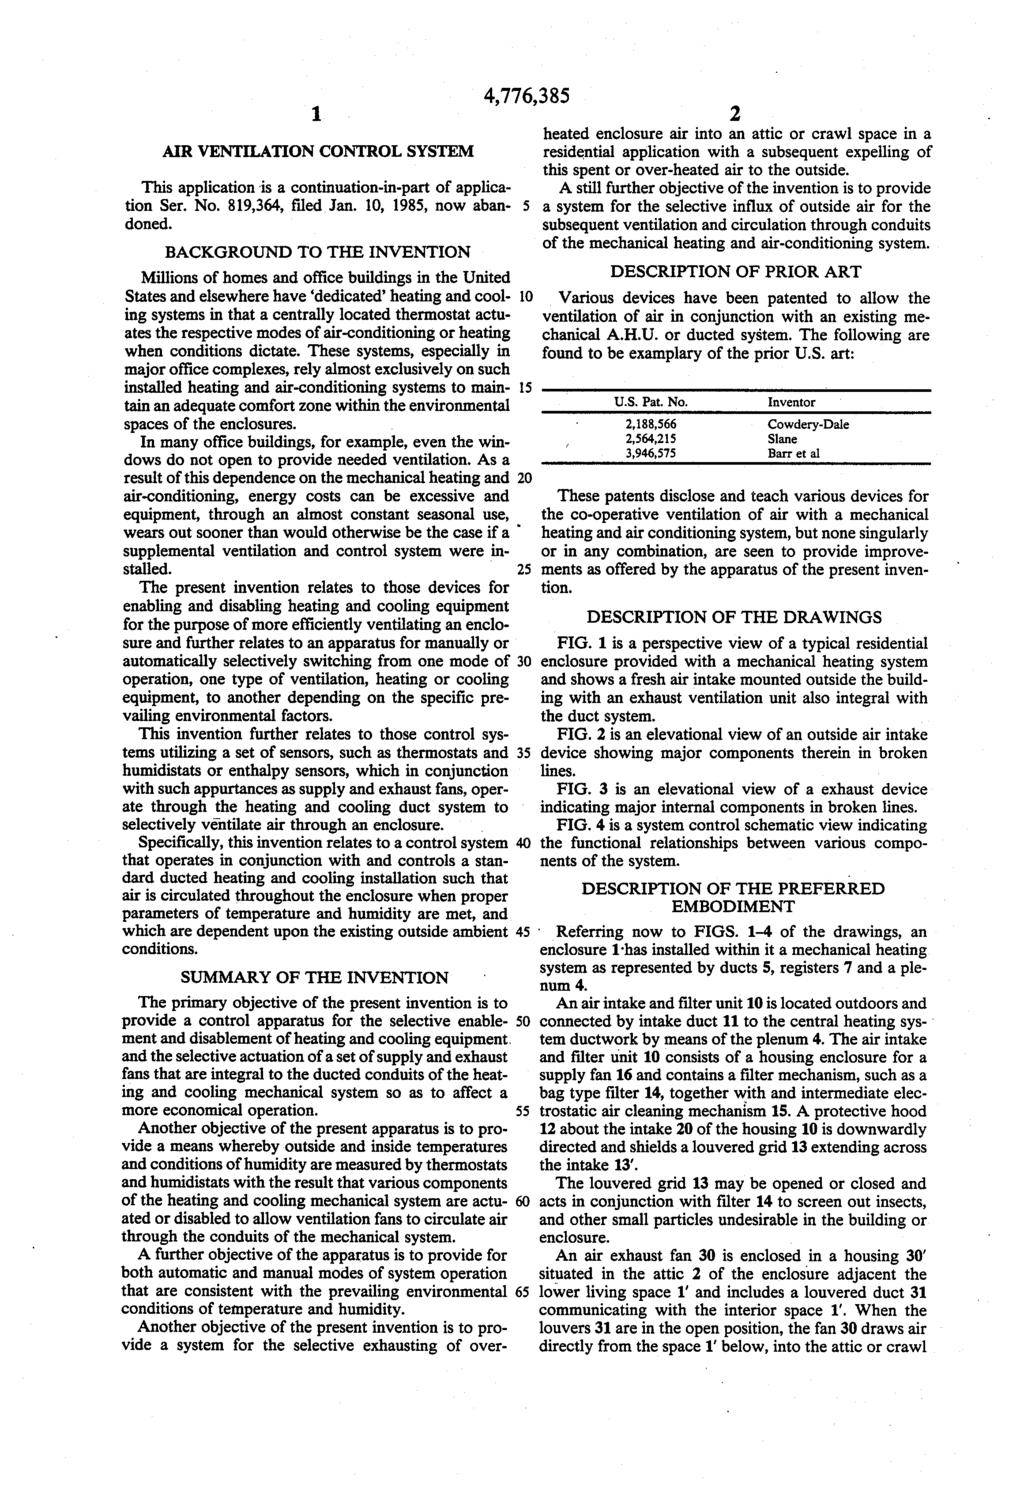 ARVENTILATION CONTROL SYSTEM This application is a continuation-in-part of applica tion Ser. No. 819,364, filed Jan. 10, 1985, now aban doned.